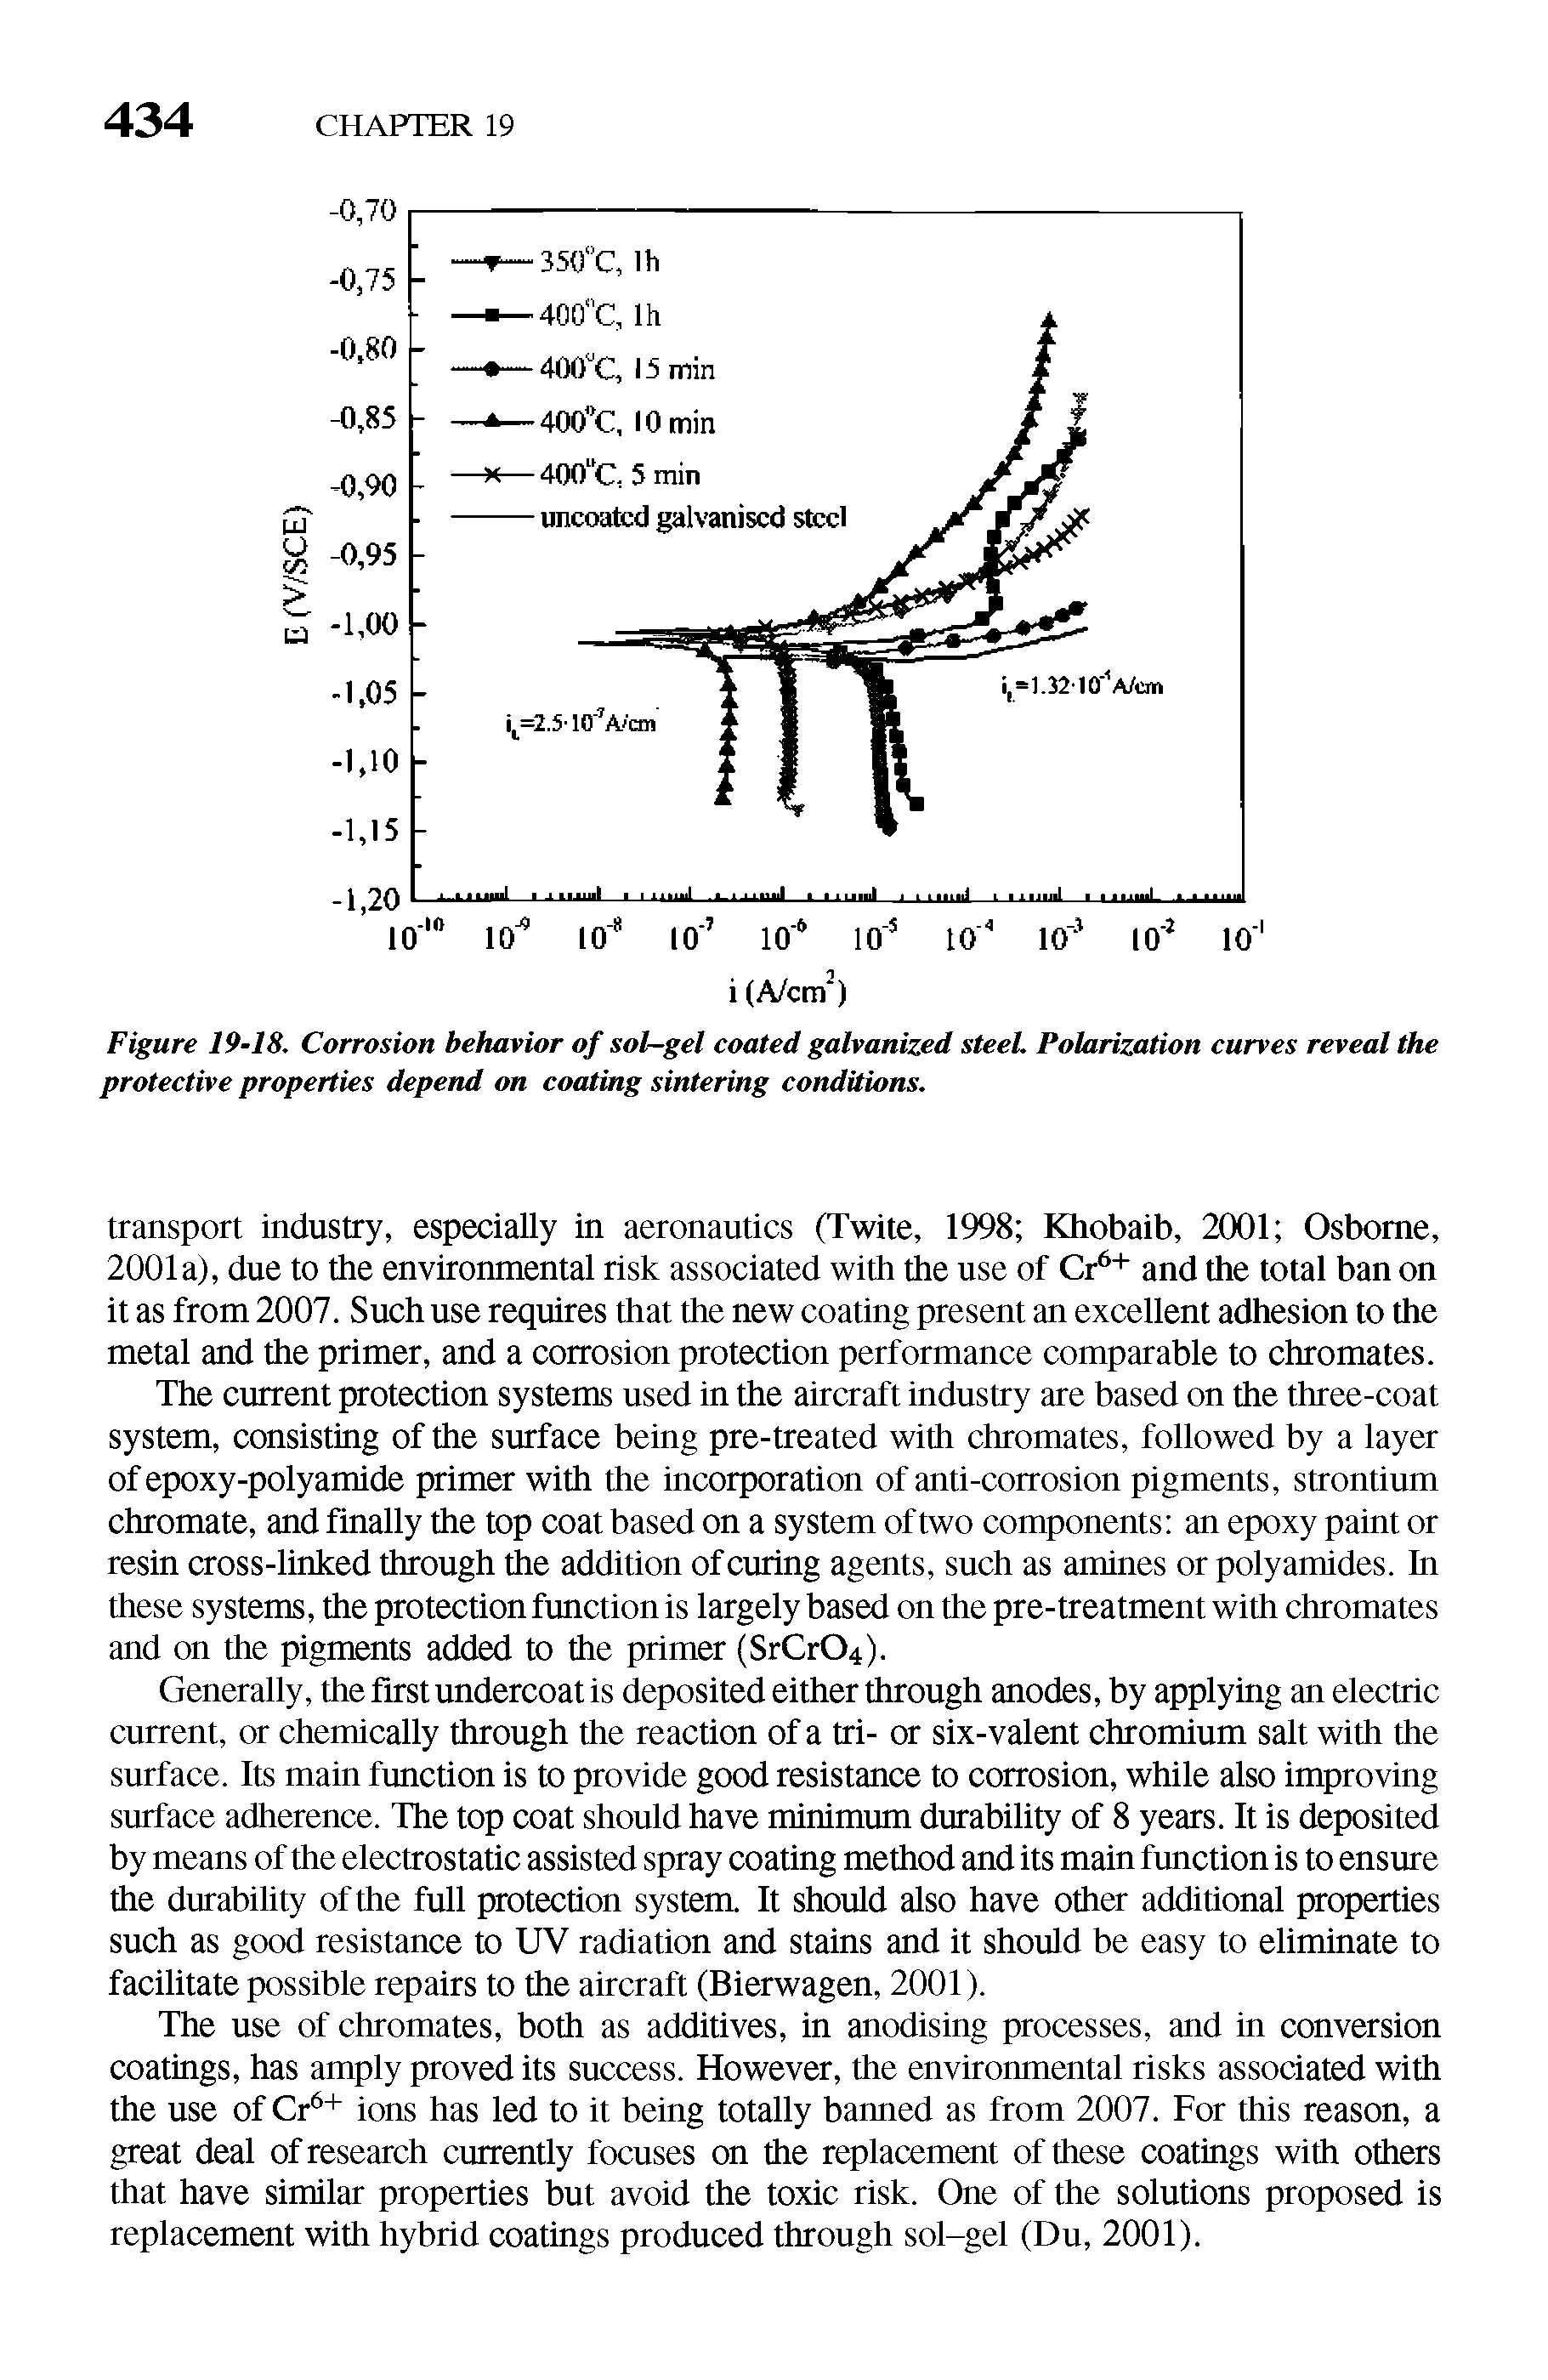 Figure 19-18. Corrosion behavior of sol-gel coated galvanized steeL Polarization curves reveal the protective properties depend on coating sintering conditions.